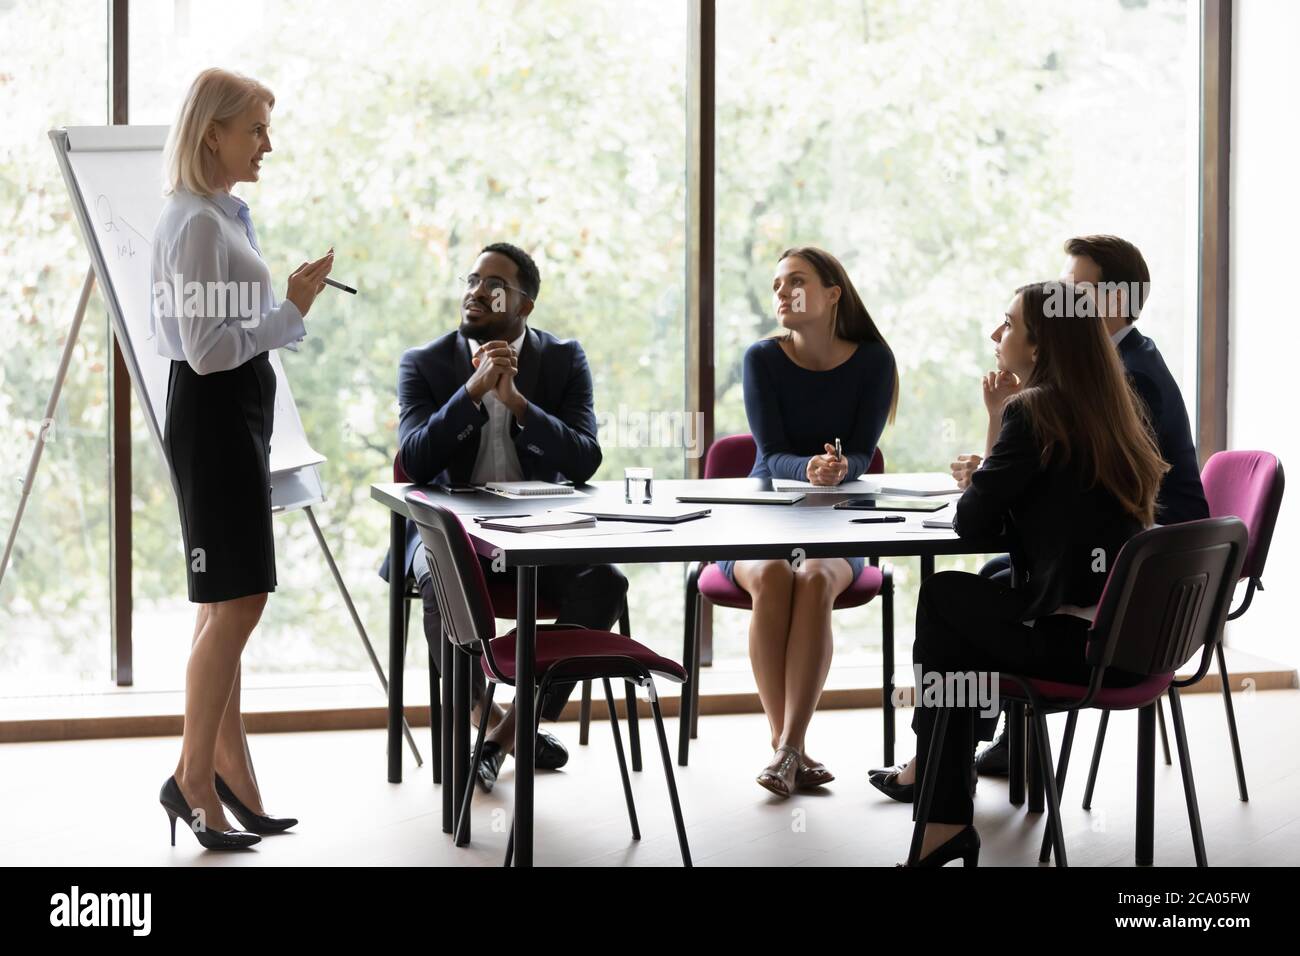 Multiethnic people participating at seminar educational meeting sit in boardroom Stock Photo